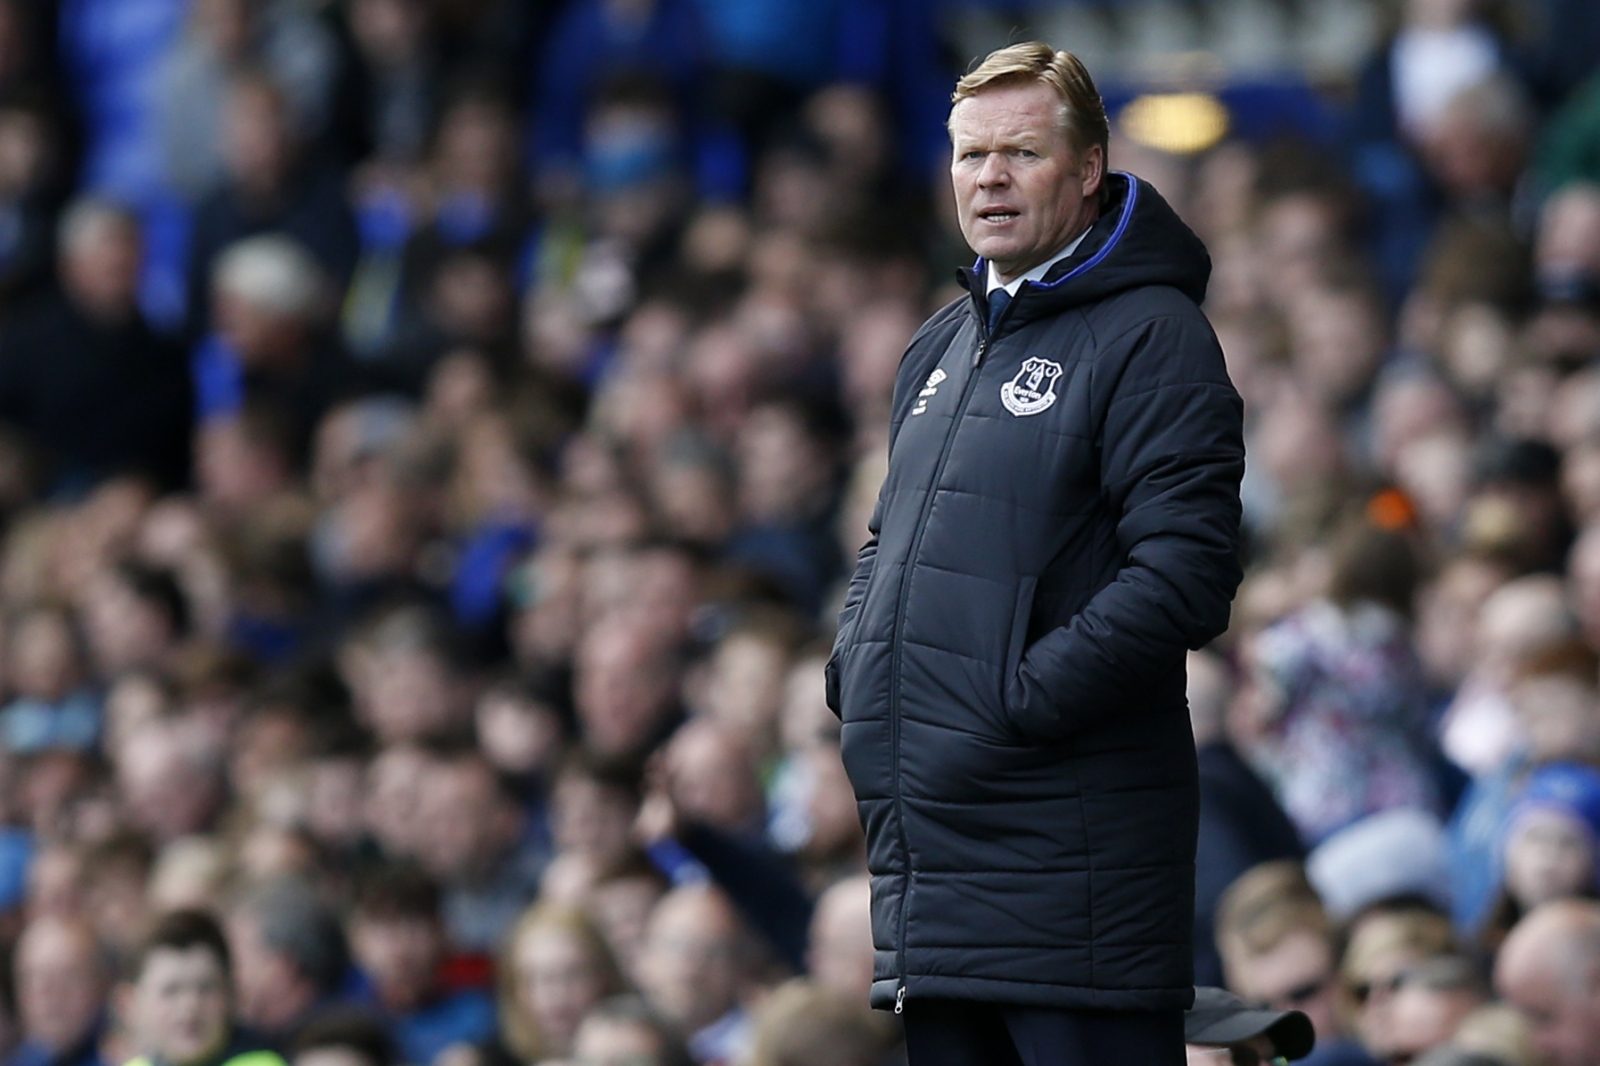 Koeman calls on Everton to strengthen in summer and is prepared to